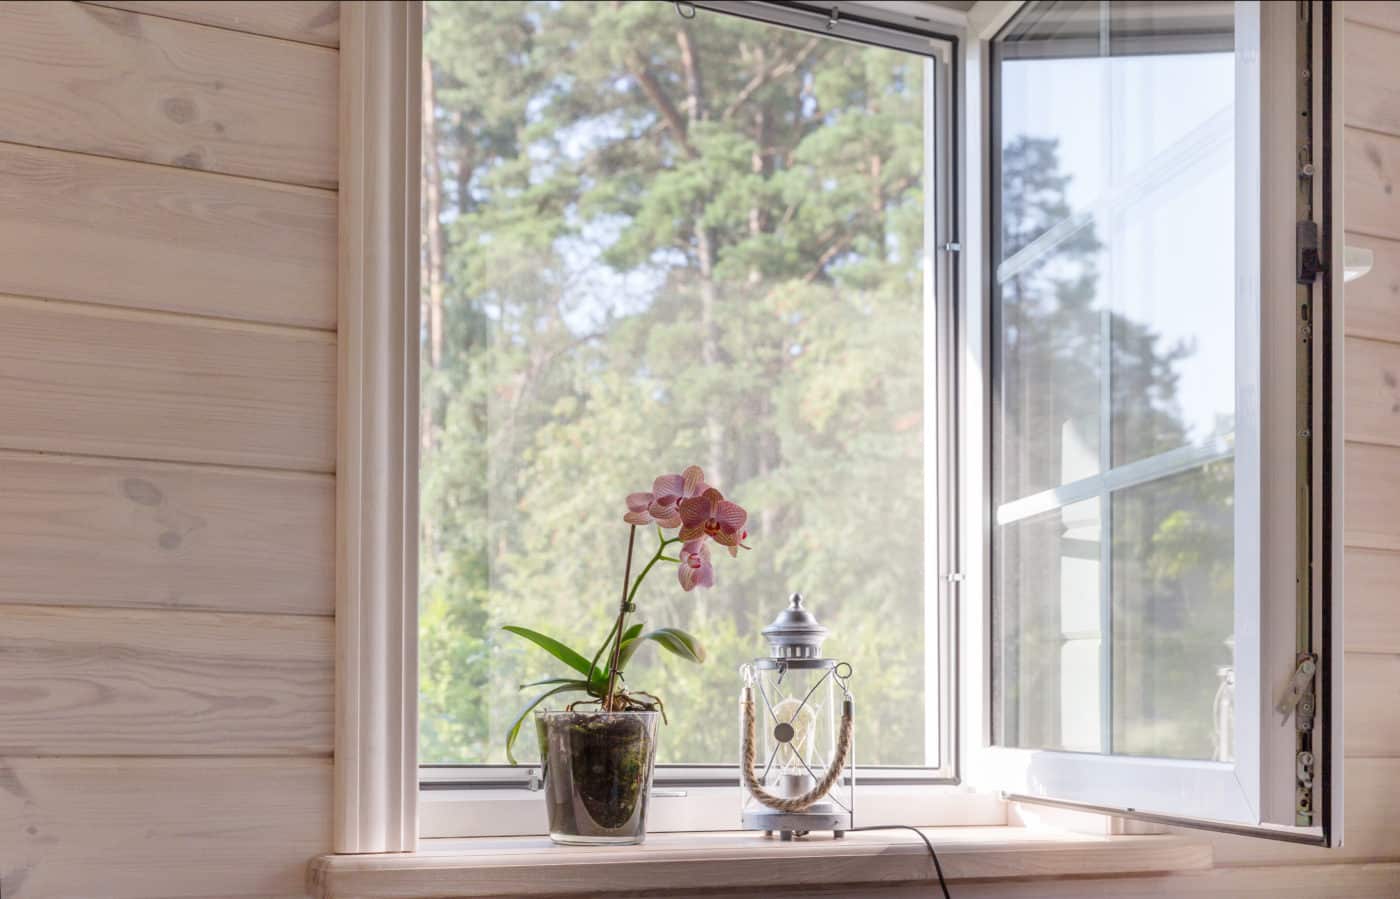 A window in a wooden cabin with a flower in a vase, protected by solar screens.